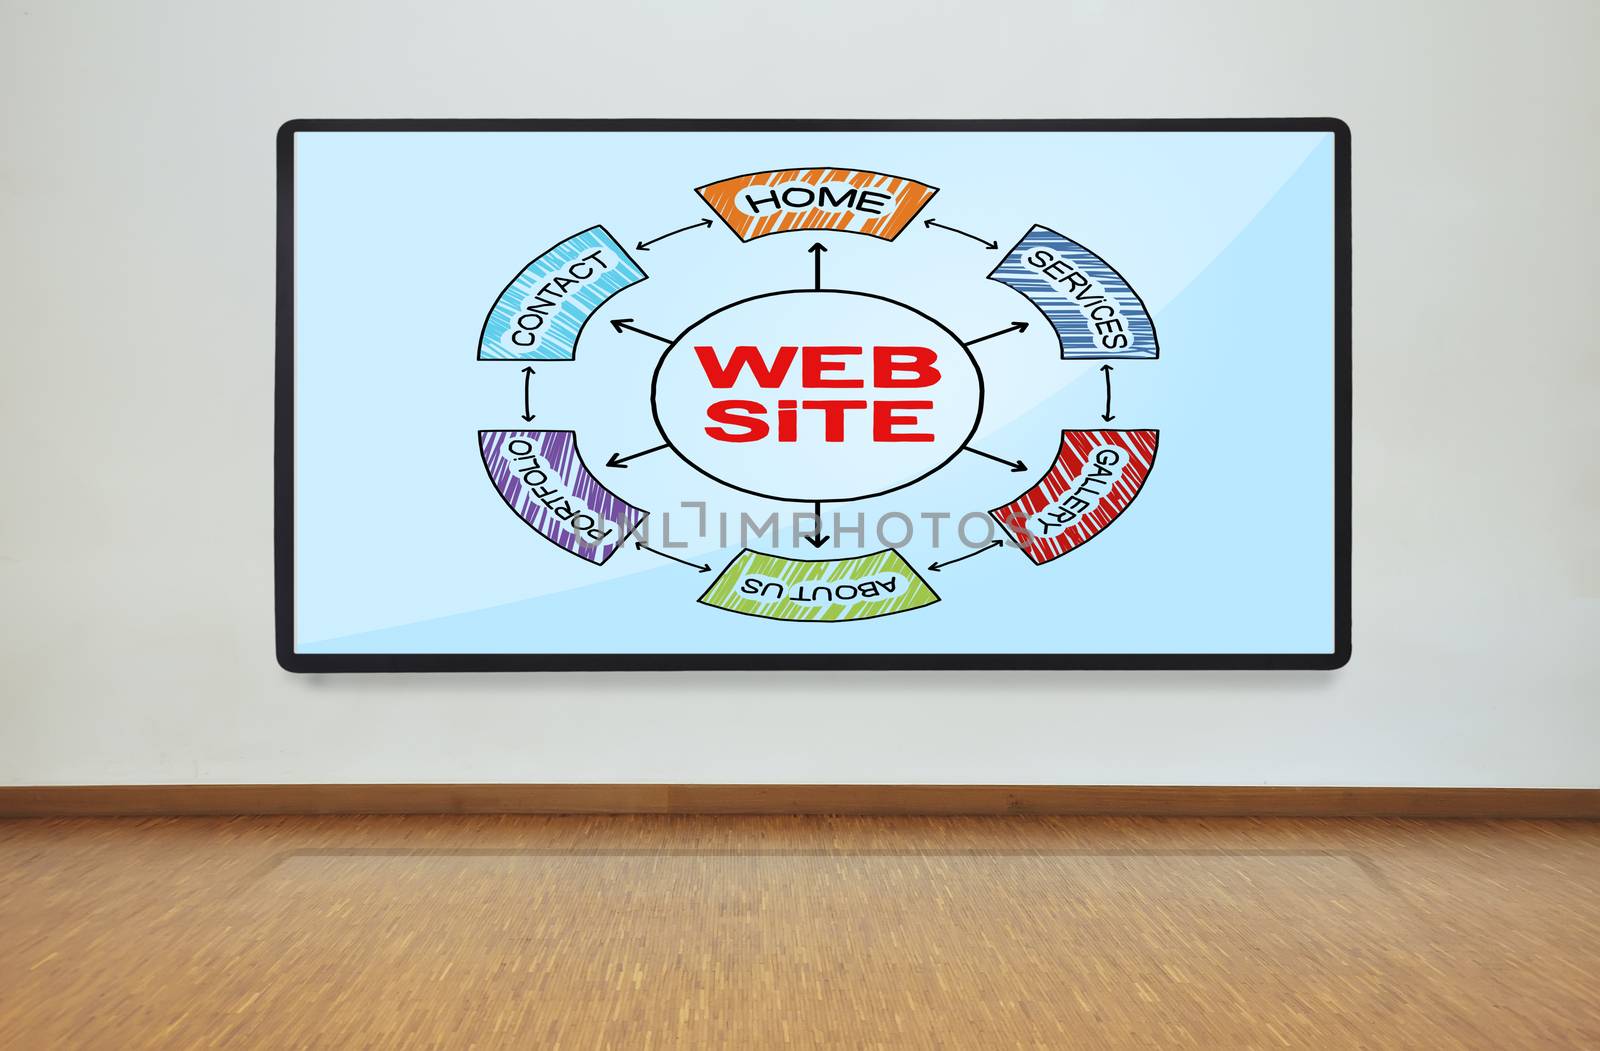 web site on wall by vetkit